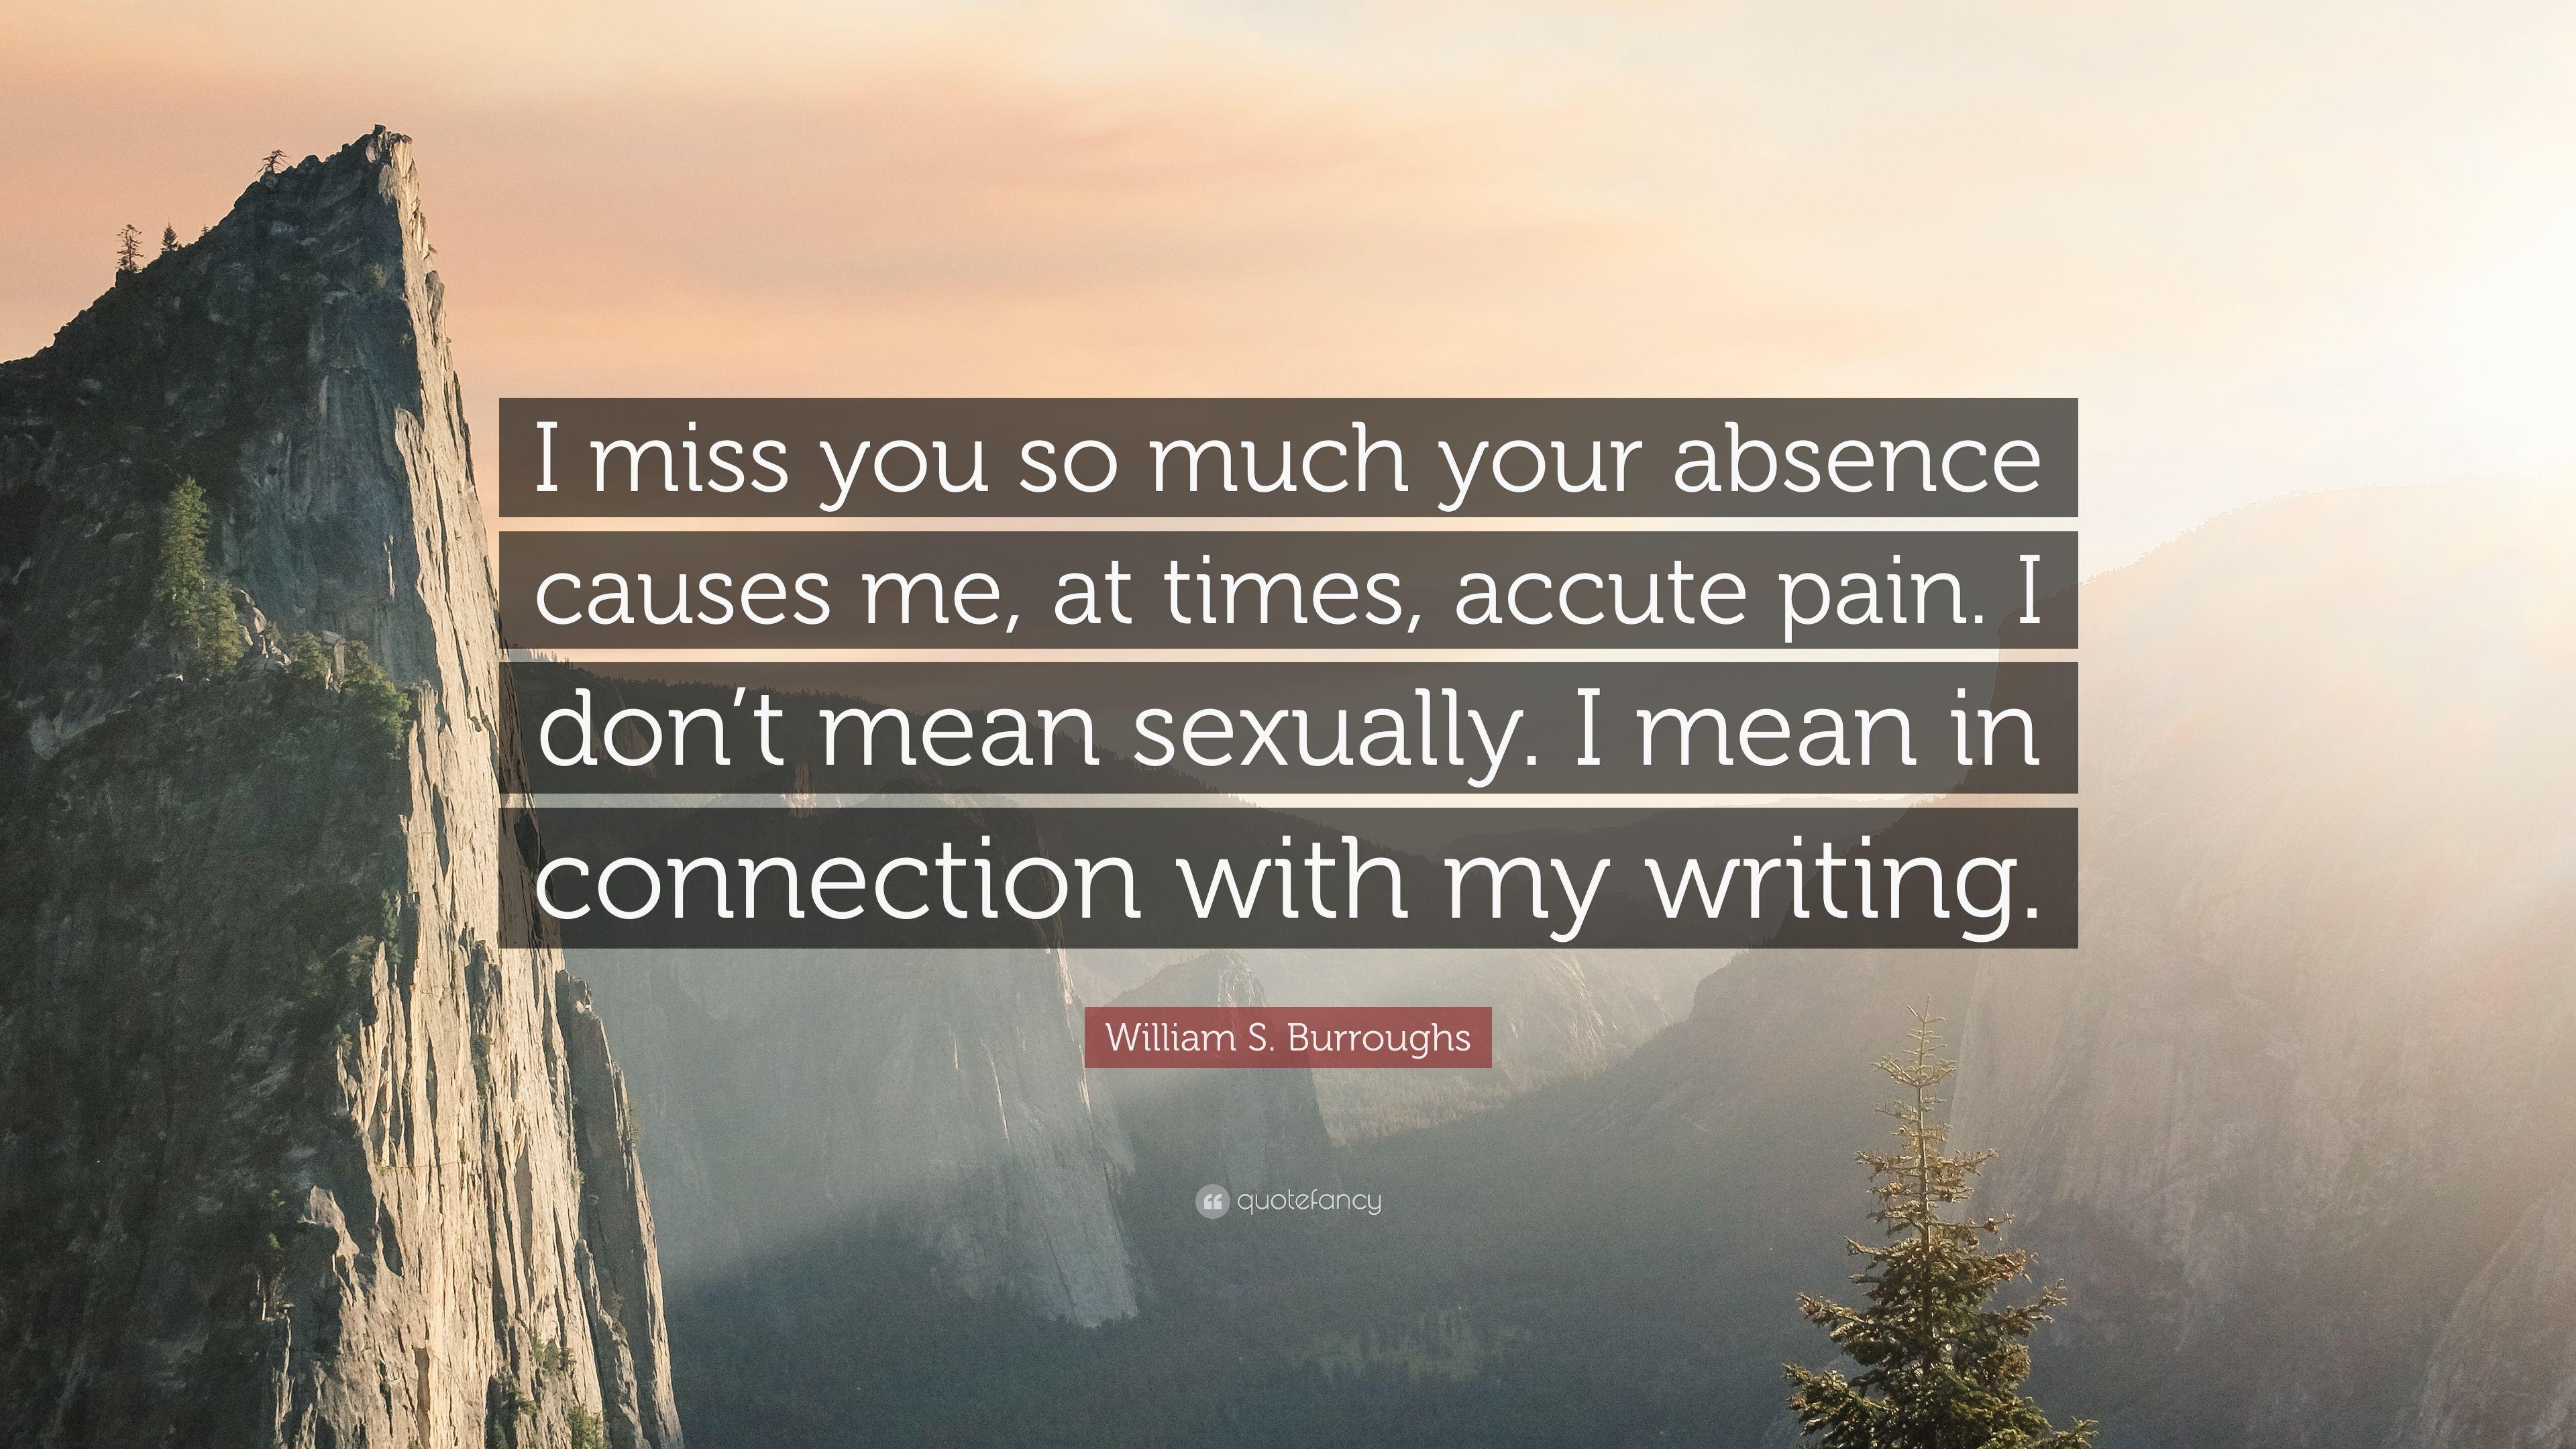 William S. Burroughs Quote: “I miss you so much your absence causes